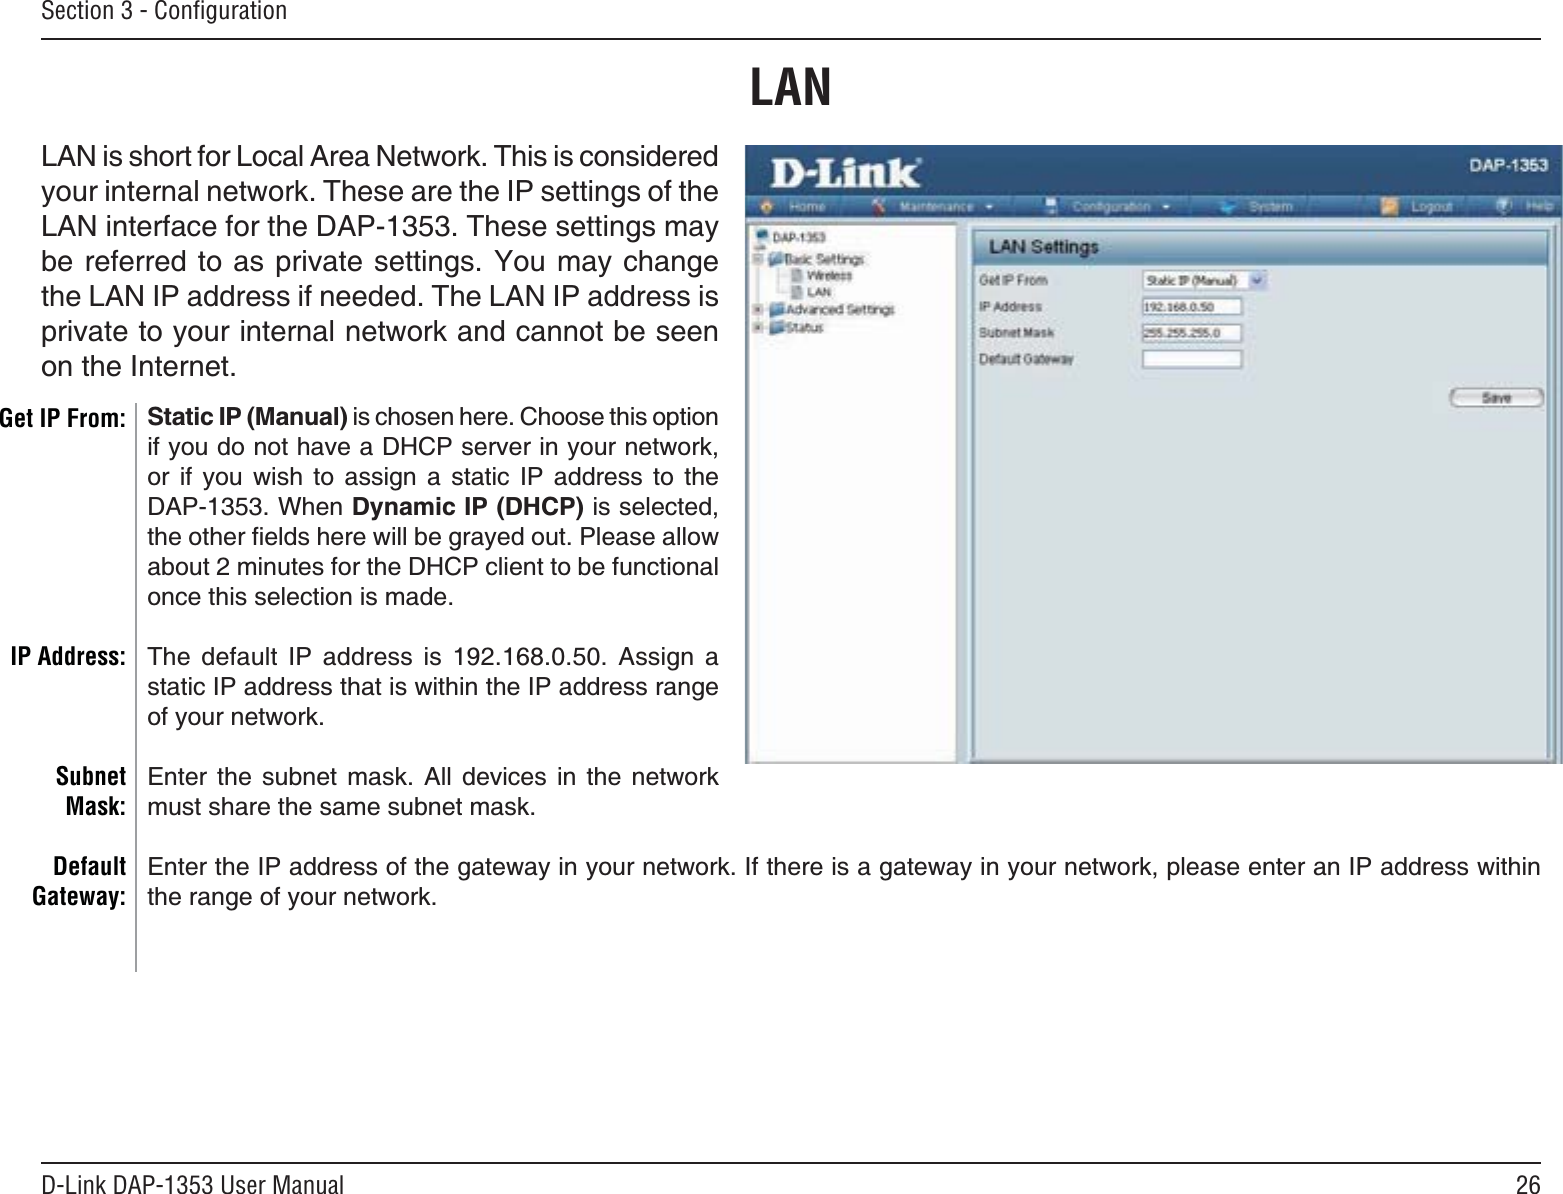 26D-Link DAP-1353 User ManualSection 3 - ConﬁgurationStatic IP (Manual) is chosen here. Choose this option if you do not have a DHCP server in your network, or if you wish to assign a static IP address to the DAP-1353. When Dynamic IP (DHCP) is selected, VJGQVJGTſGNFUJGTGYKNNDGITC[GFQWV2NGCUGCNNQYCDQWVOKPWVGUHQTVJG&amp;*%2ENKGPVVQDGHWPEVKQPCNonce this selection is made. The default IP address is 192.168.0.50. Assign a static IP address that is within the IP address range of your network.&apos;PVGT VJG UWDPGV OCUM #NN FGXKEGU KP VJG PGVYQTMOWUVUJCTGVJGUCOGUWDPGVOCUMEnter the IP address of the gateway in your network. If there is a gateway in your network, please enter an IP address within the range of your network.LANGet IP From:IP Address:SubnetMask:DefaultGateway:LAN is short for Local Area Network. This is considered your internal network. These are the IP settings of the LAN interface for the DAP-1353. These settings may DGTGHGTTGFVQCU RTKXCVGUGVVKPIU;QWOC[EJCPIGthe LAN IP address if needed. The LAN IP address is RTKXCVGVQ[QWTKPVGTPCNPGVYQTMCPFECPPQVDGUGGPon the Internet.